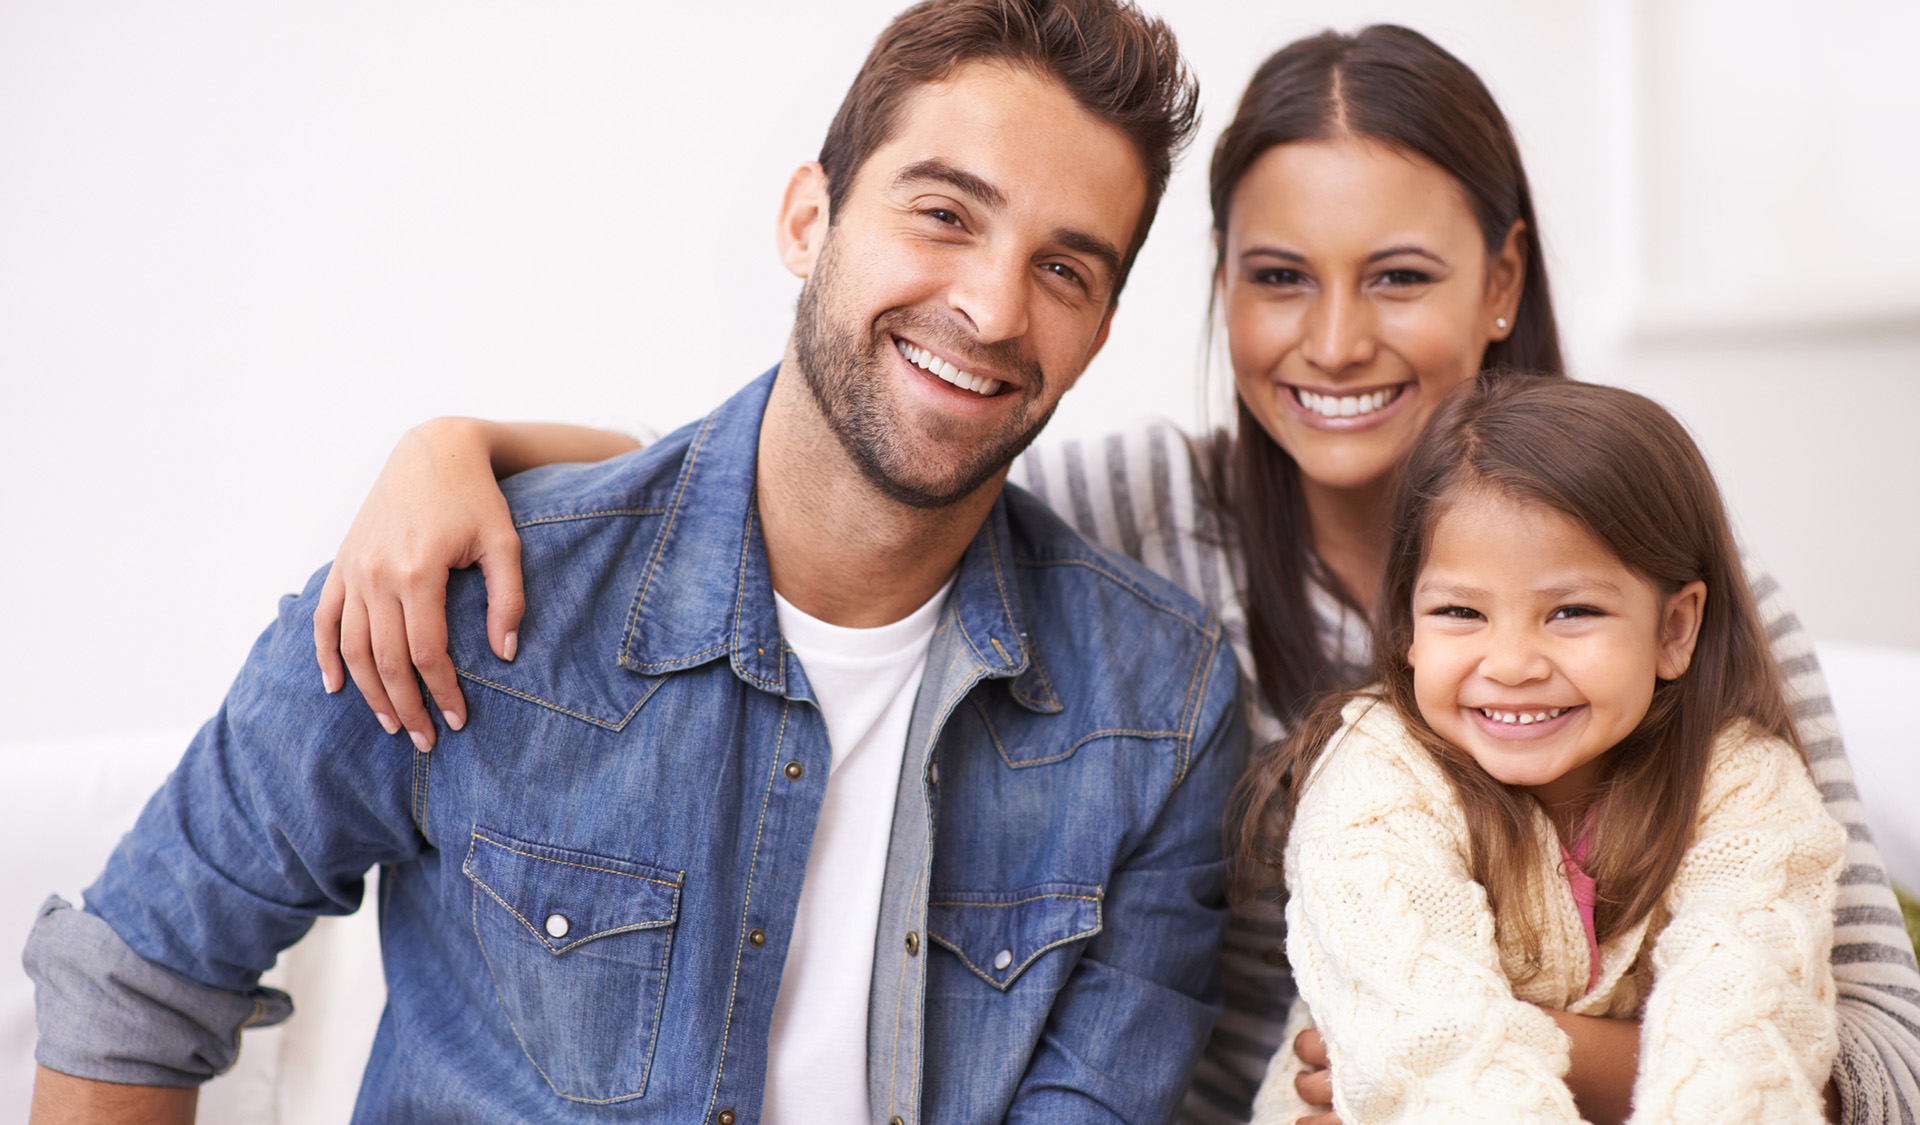 Image of family of three smiling showing off their teeth. Man positioned on left and woman holding female toddler on right.